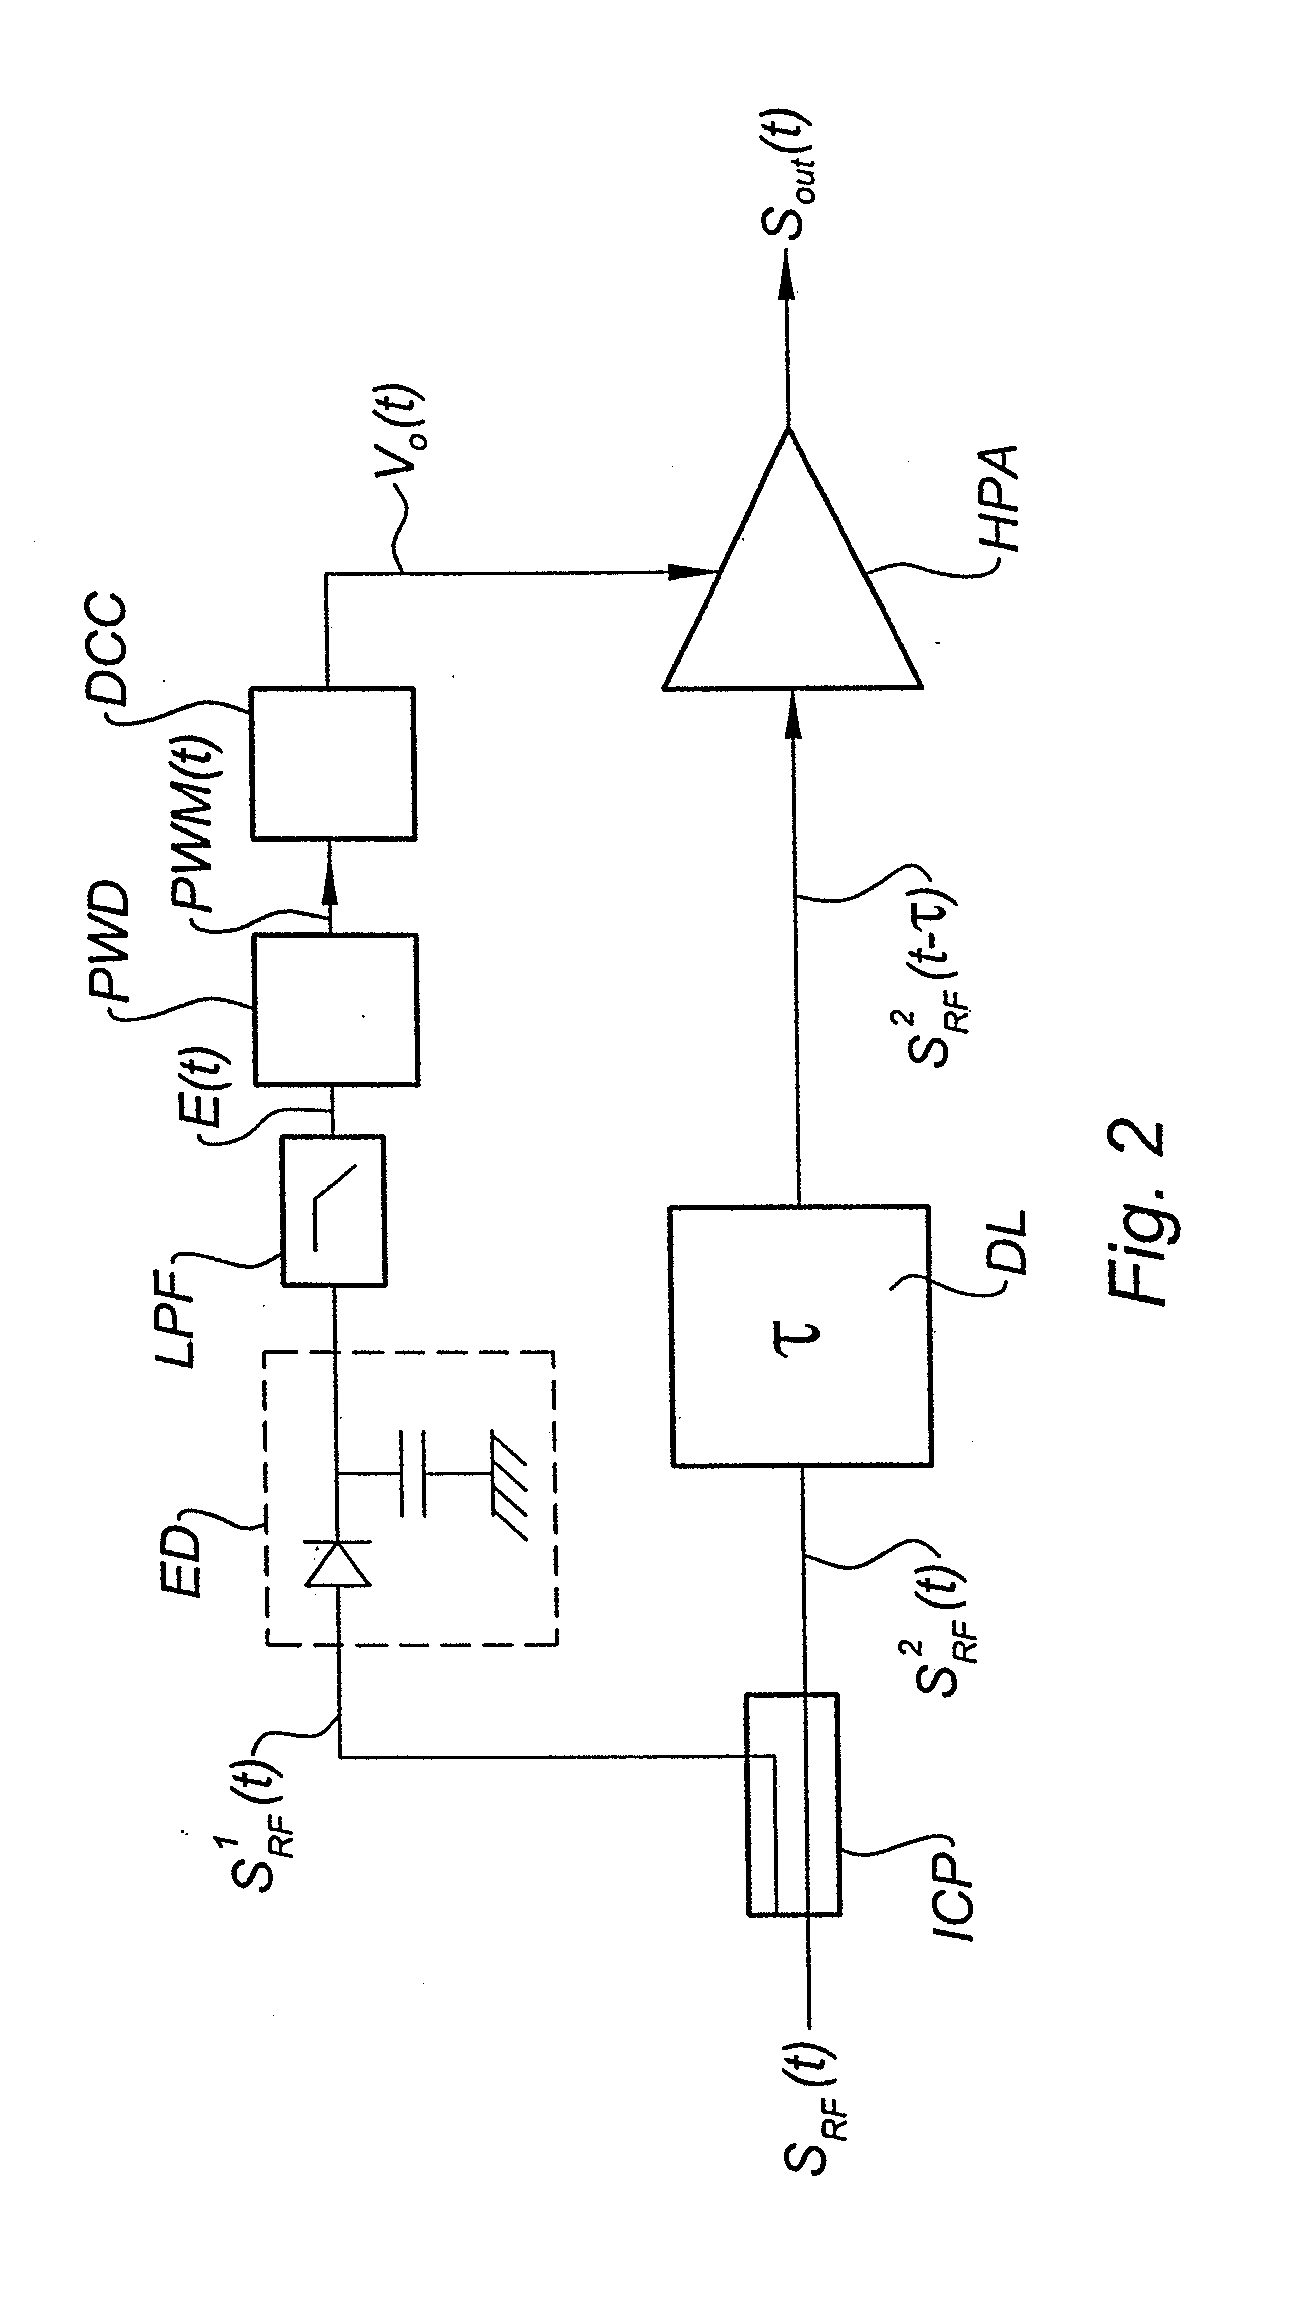 Radio-Frequency Power Amplifier with Fast Envelope Tracking